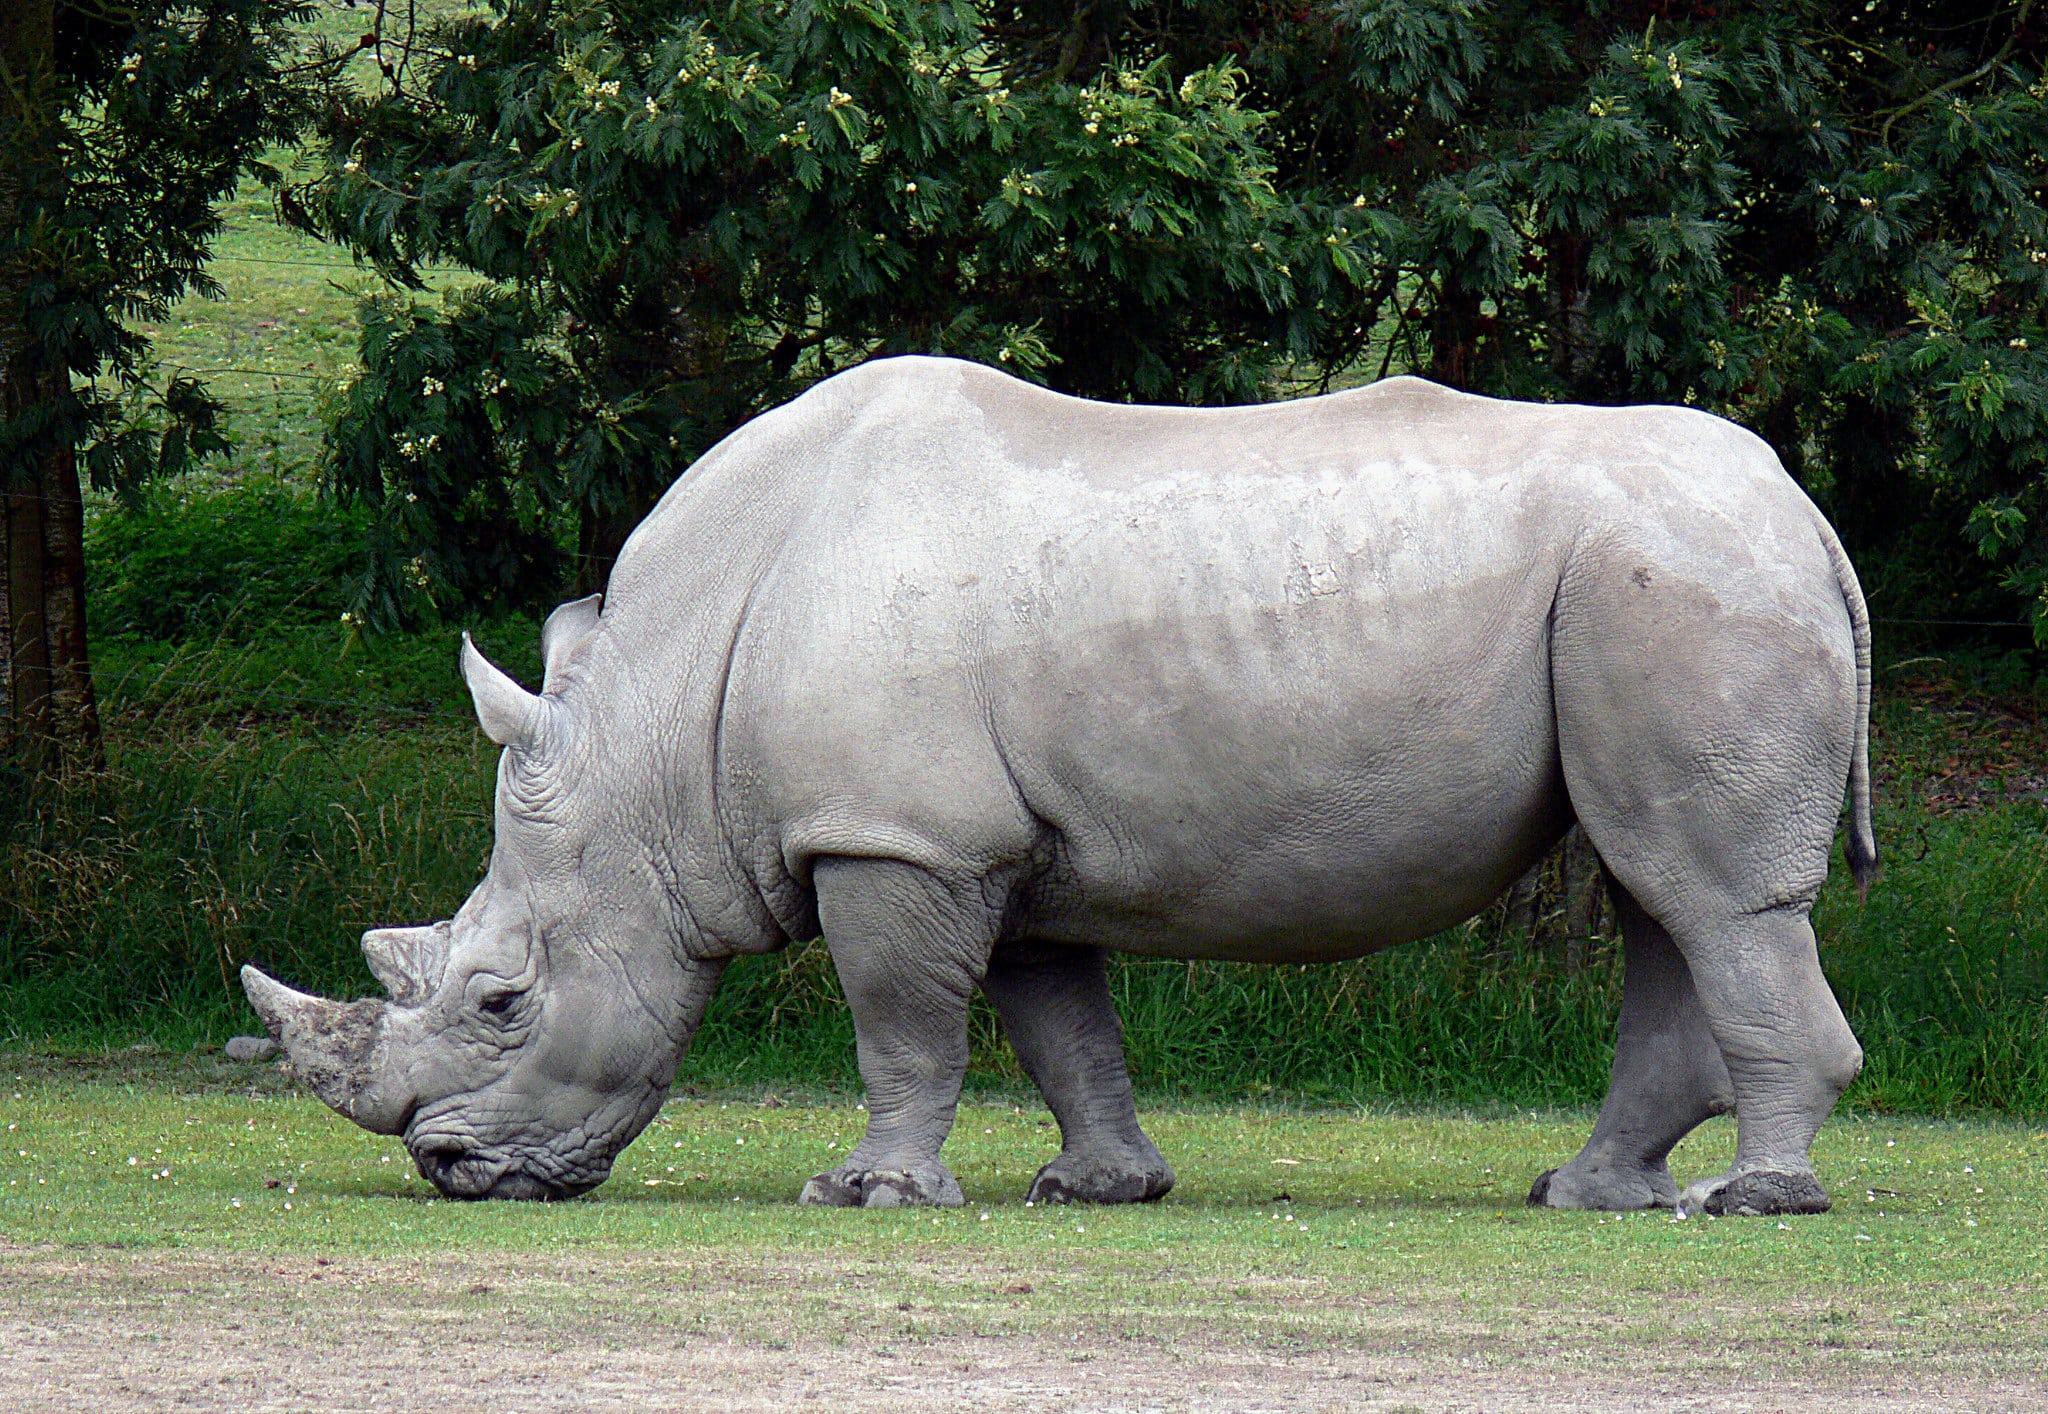 Flickr, “White Rhinoceros” by GPA Photo Archive, used under CC BY 2.0